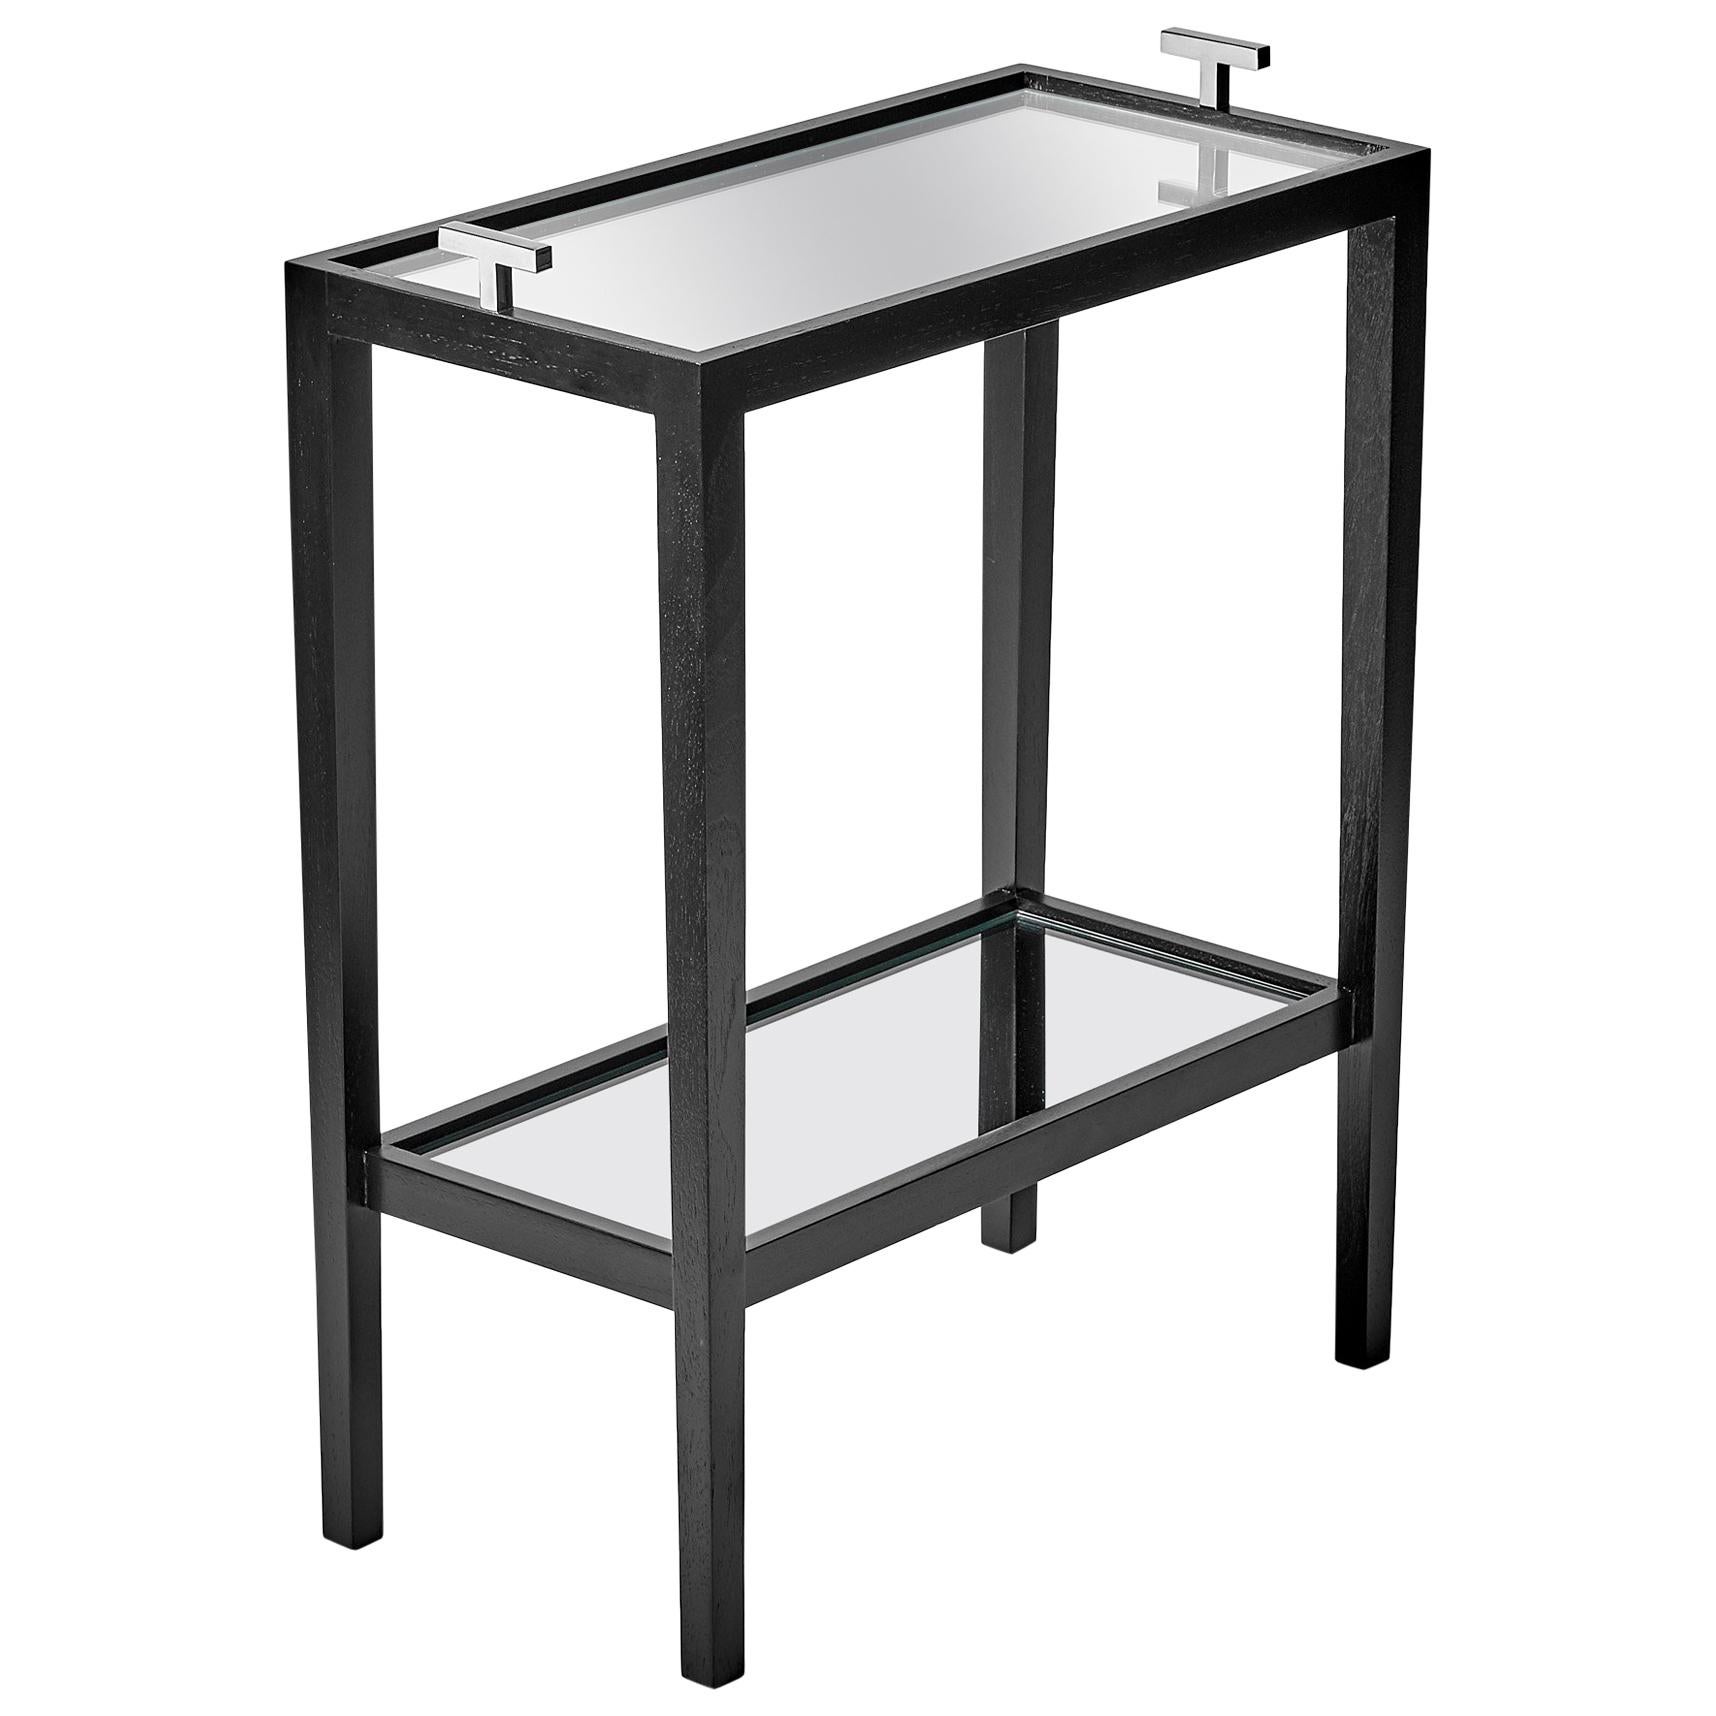 "T" Drink Table with black stain, mirrored inserts and polished chrome hardware For Sale